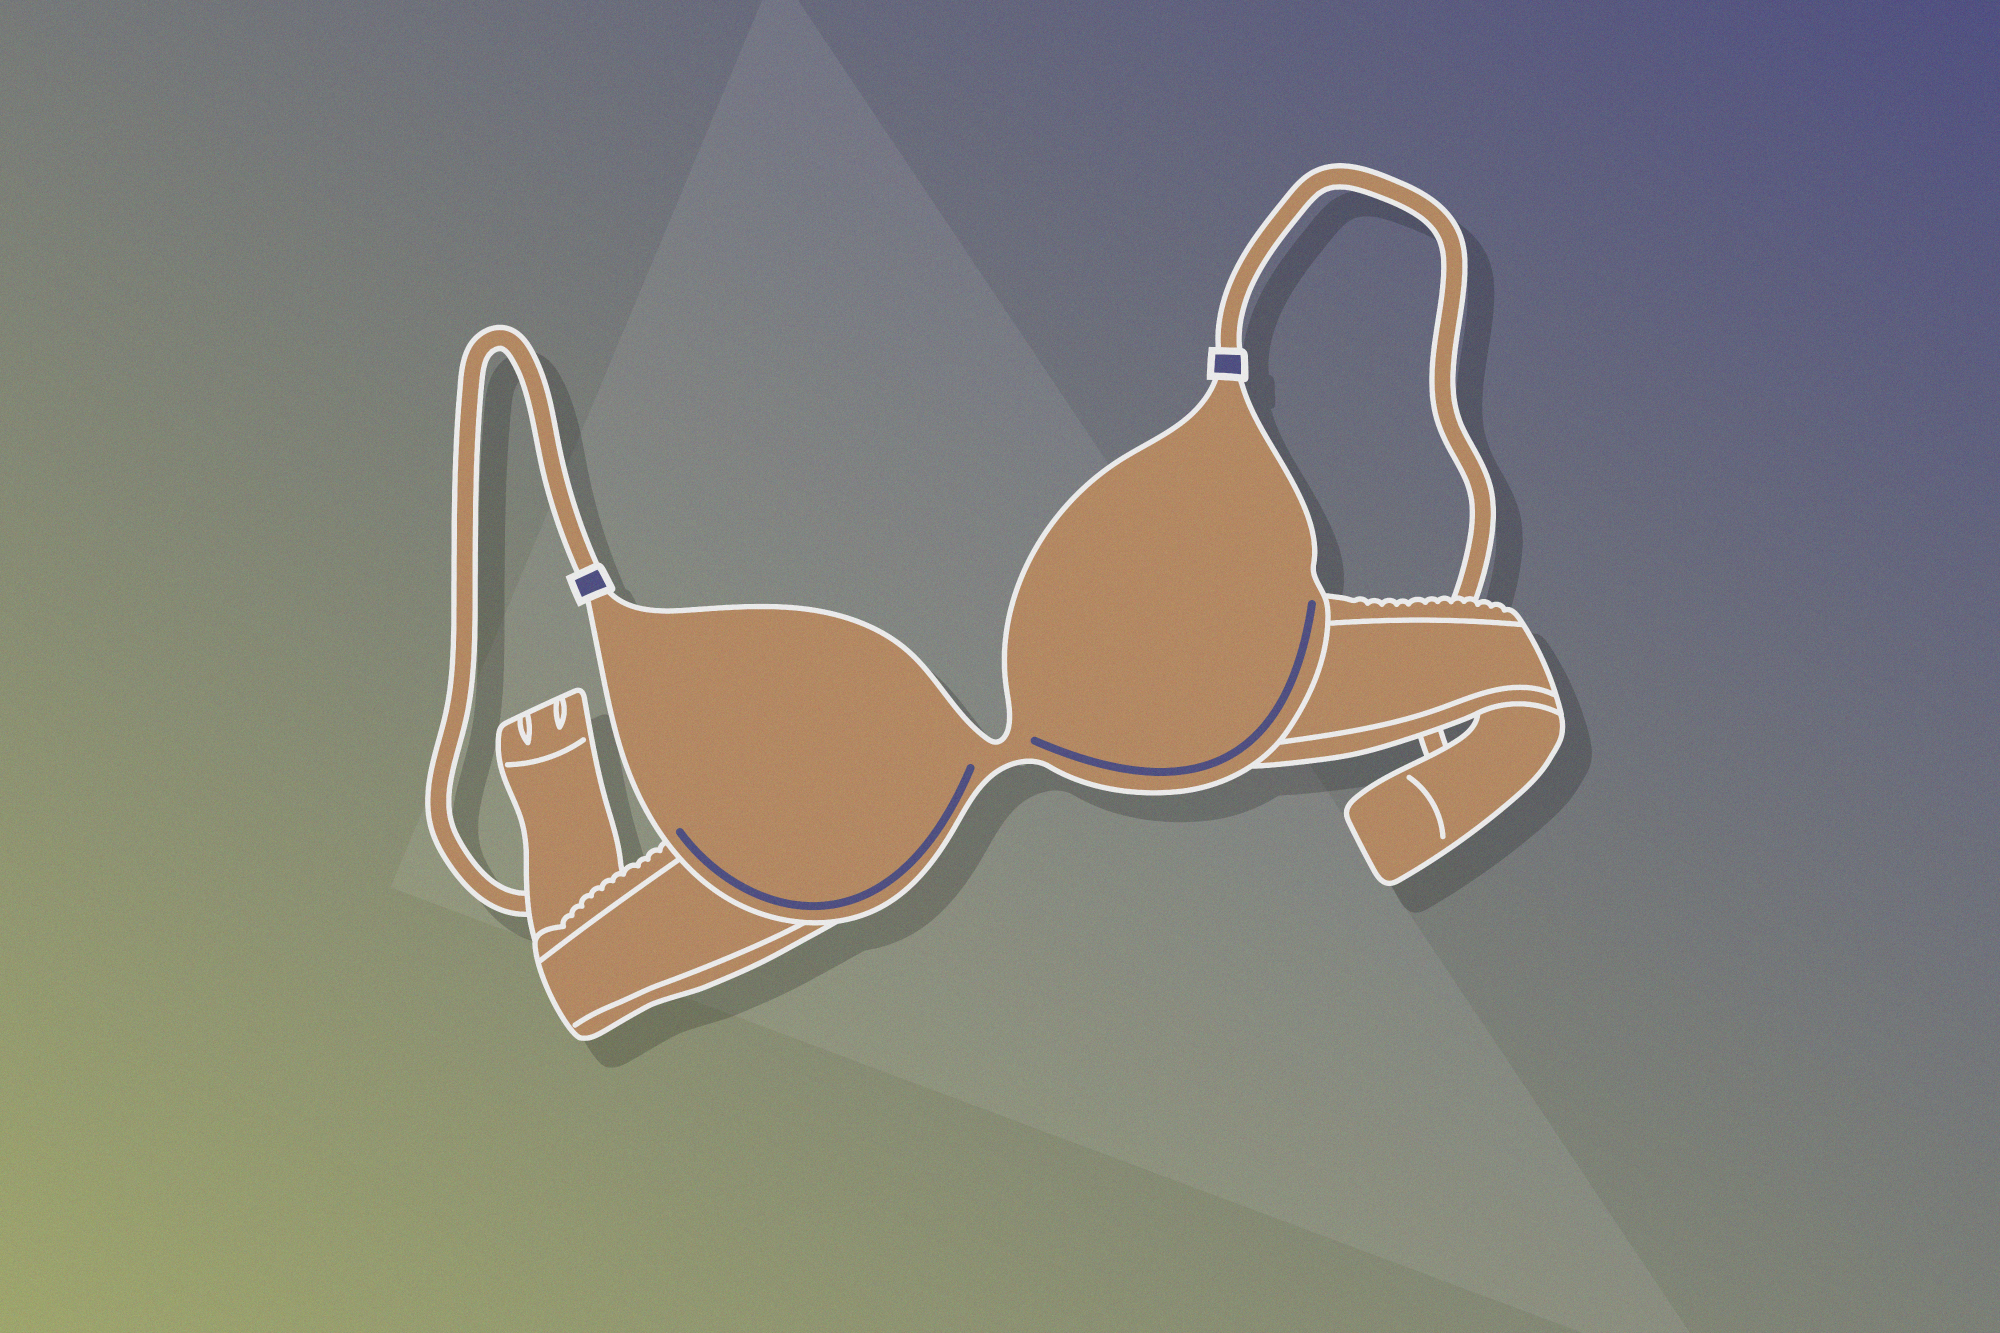 Are Underwire Bras Harmful? Health Experts Weigh In